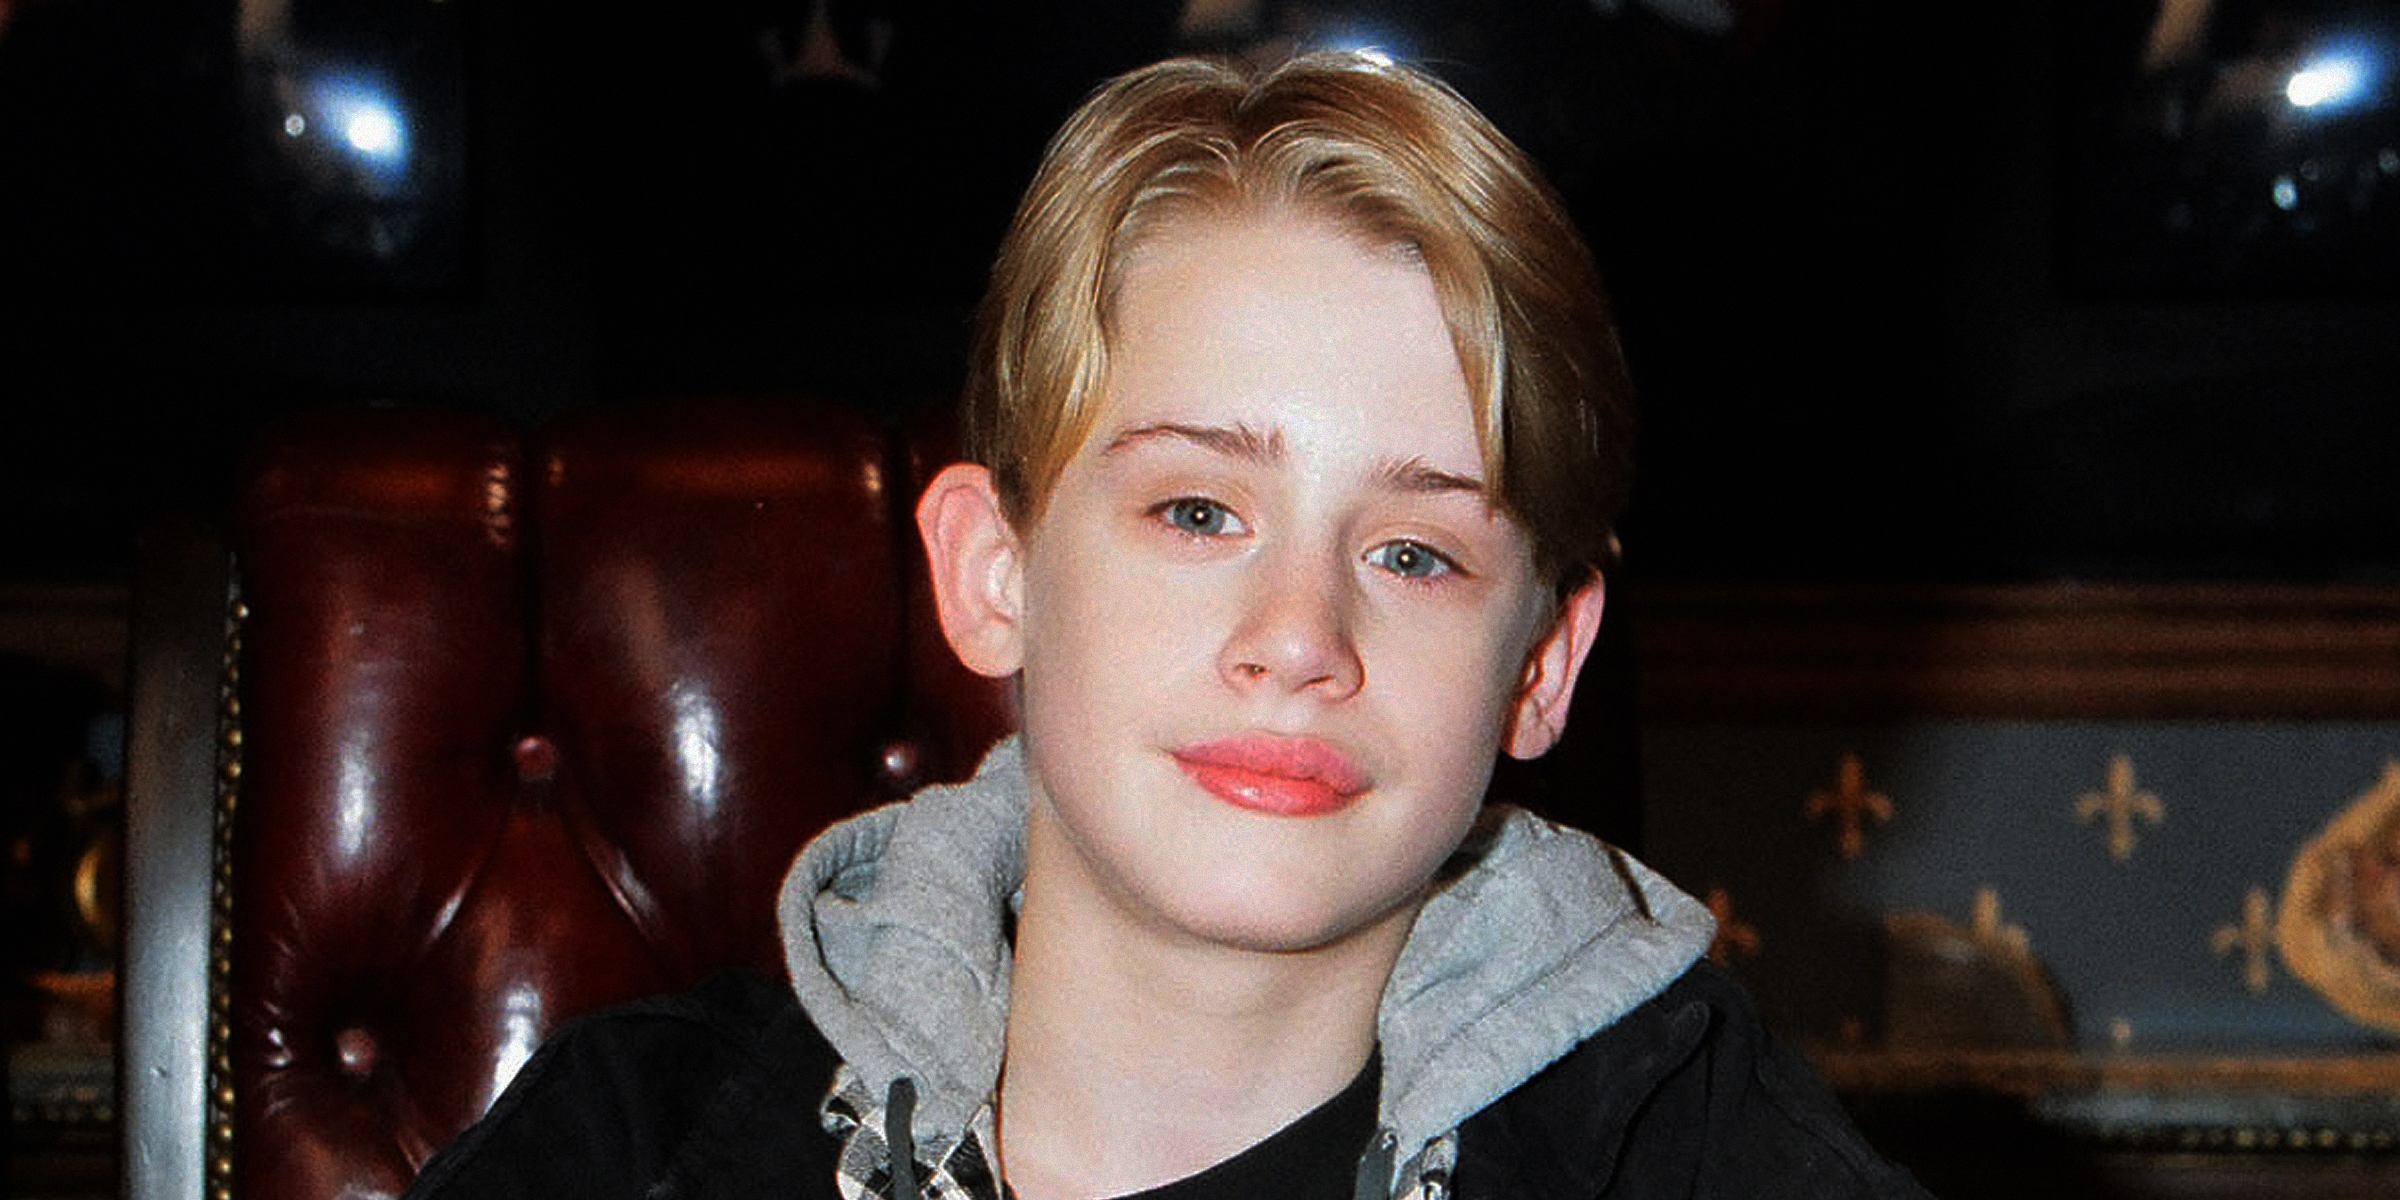 A young Macaulay Culkin | Source: Getty Images